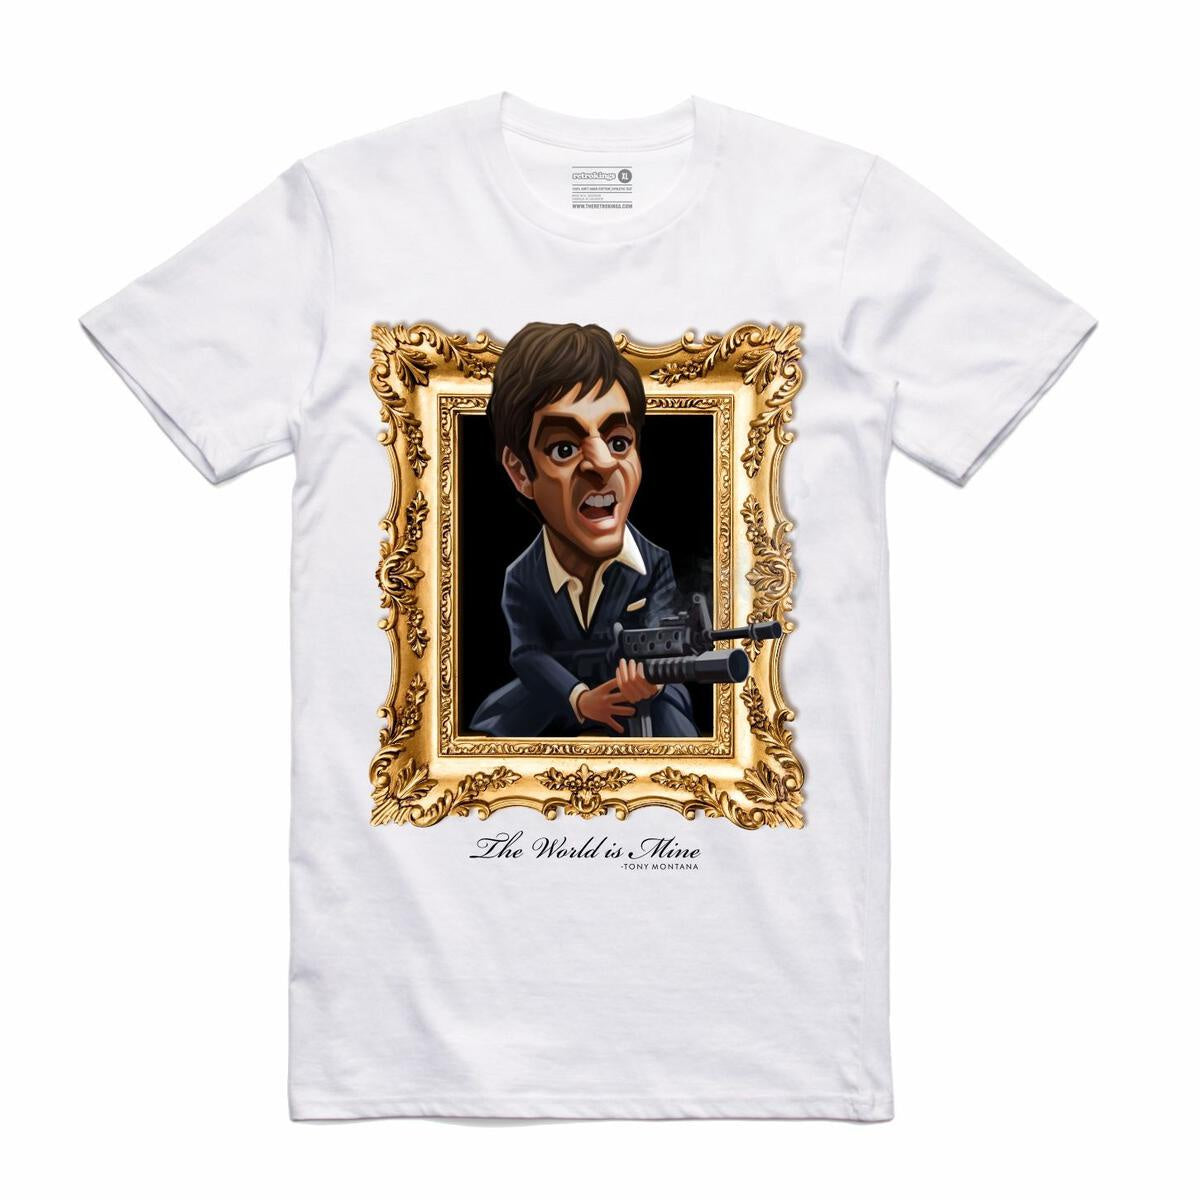 Retro Kings Scarface "The World is Mine" White Tee